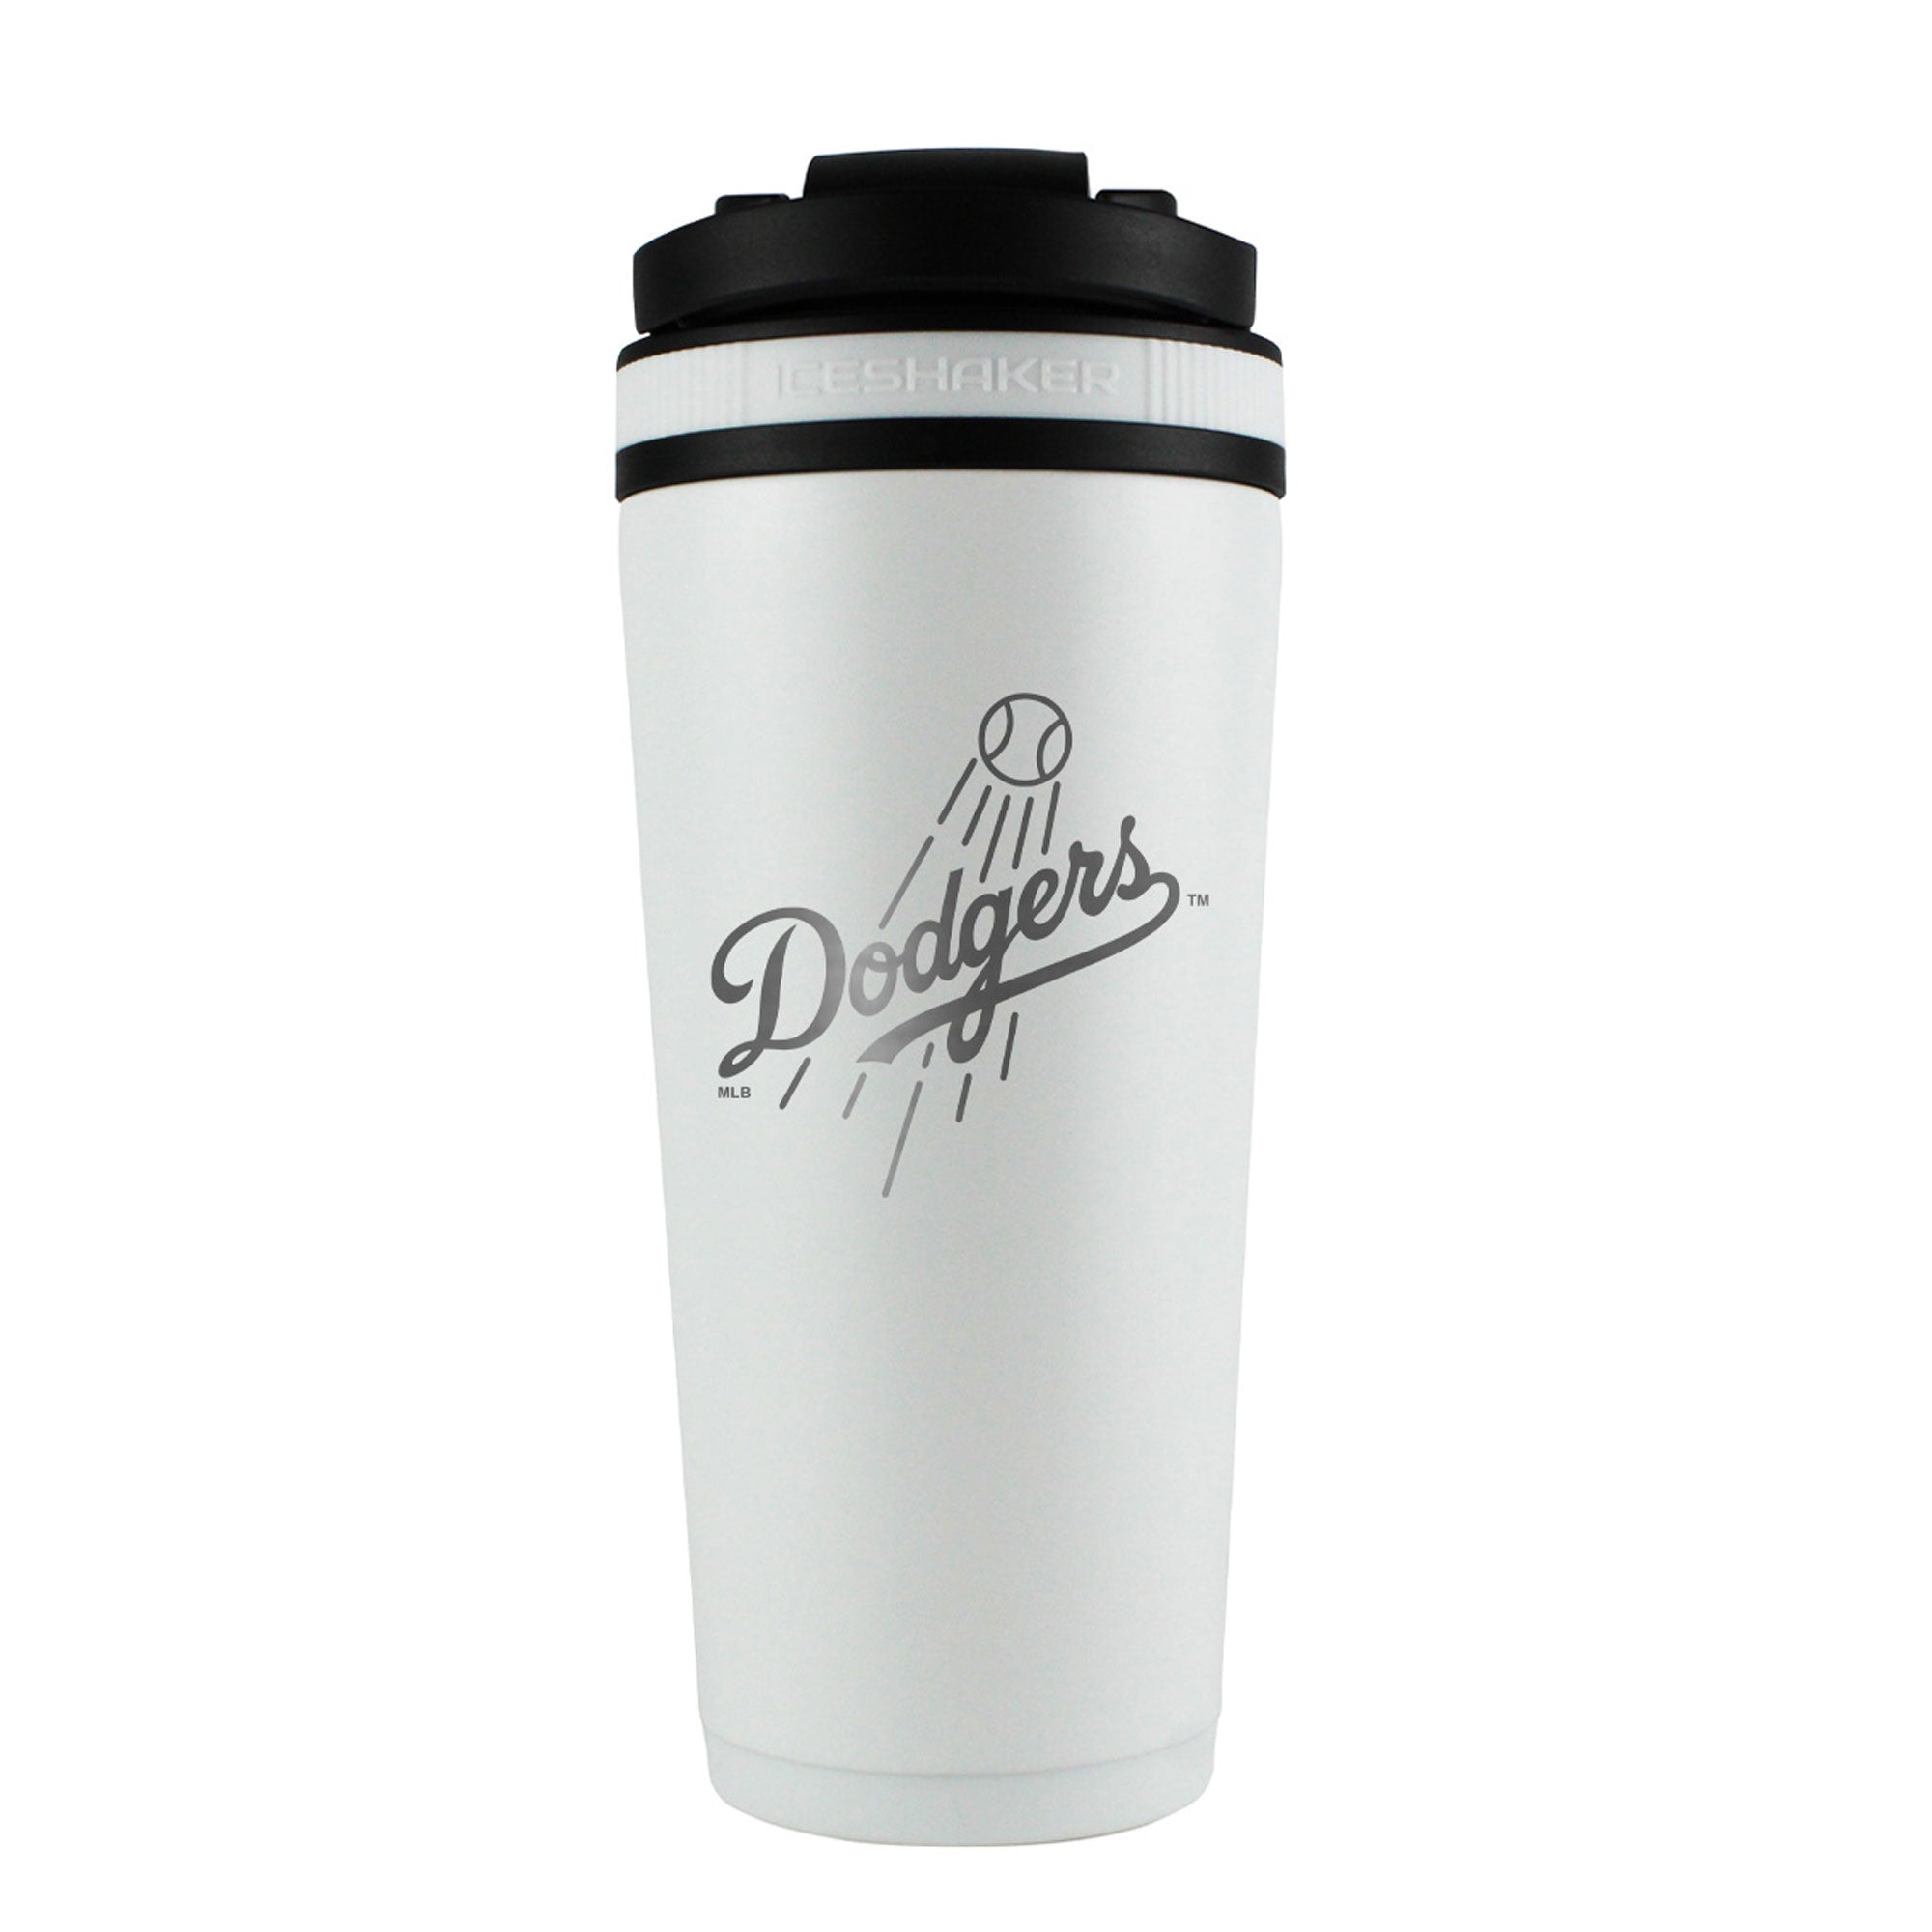 Officially Licensed Los Angeles Dodgers 26oz Ice Shaker - White